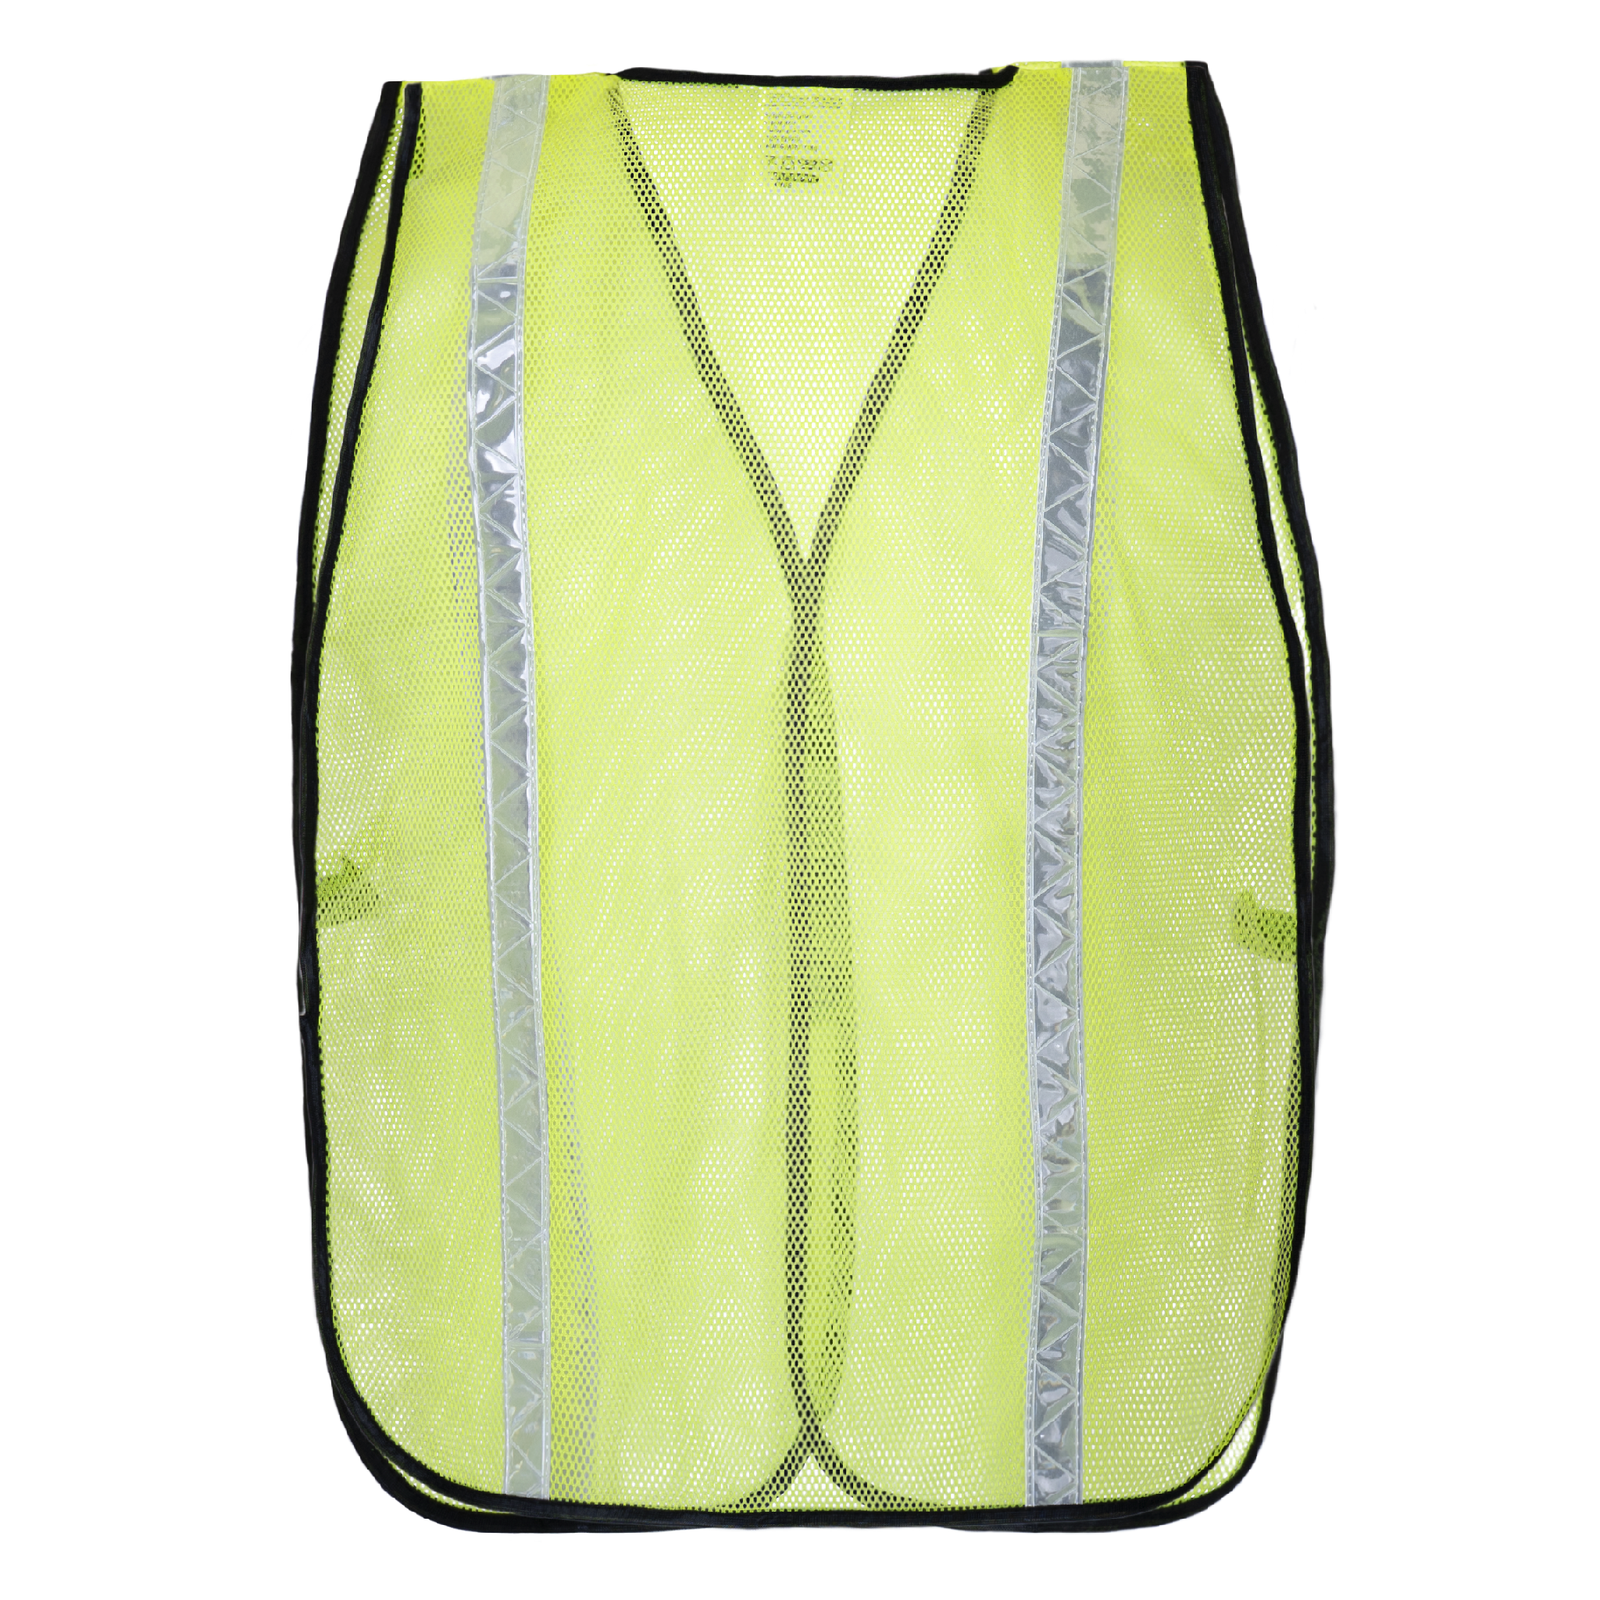 Back of a JORESTECH high visibility mesh safety vest with 1 inch reflective strip and side elastic straps